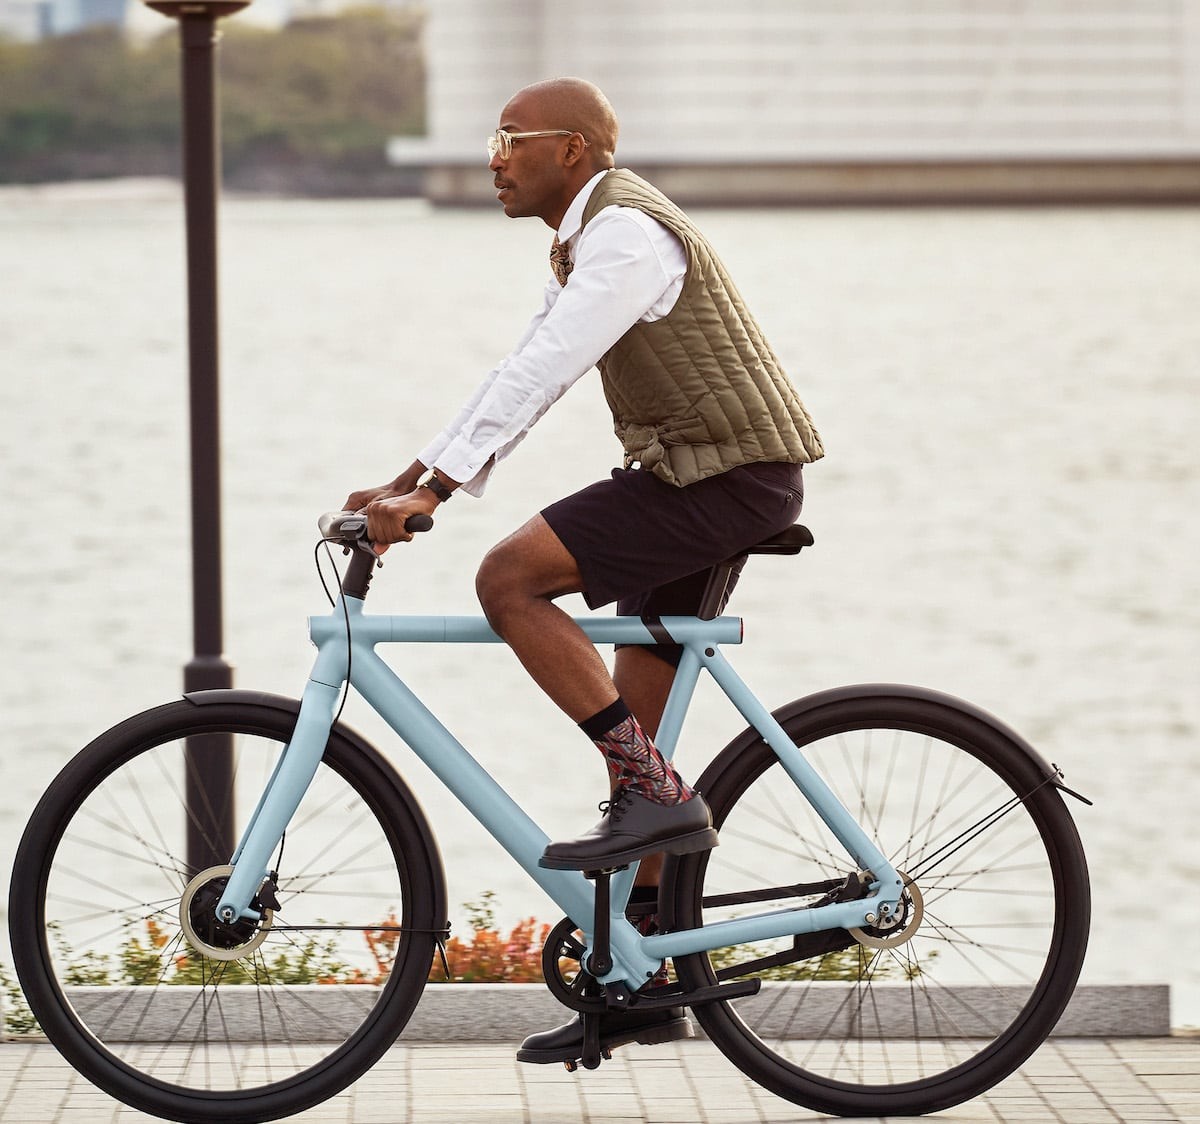 VanMoof S3 Automatic Electronic Bicycle has built-in anti-theft technology